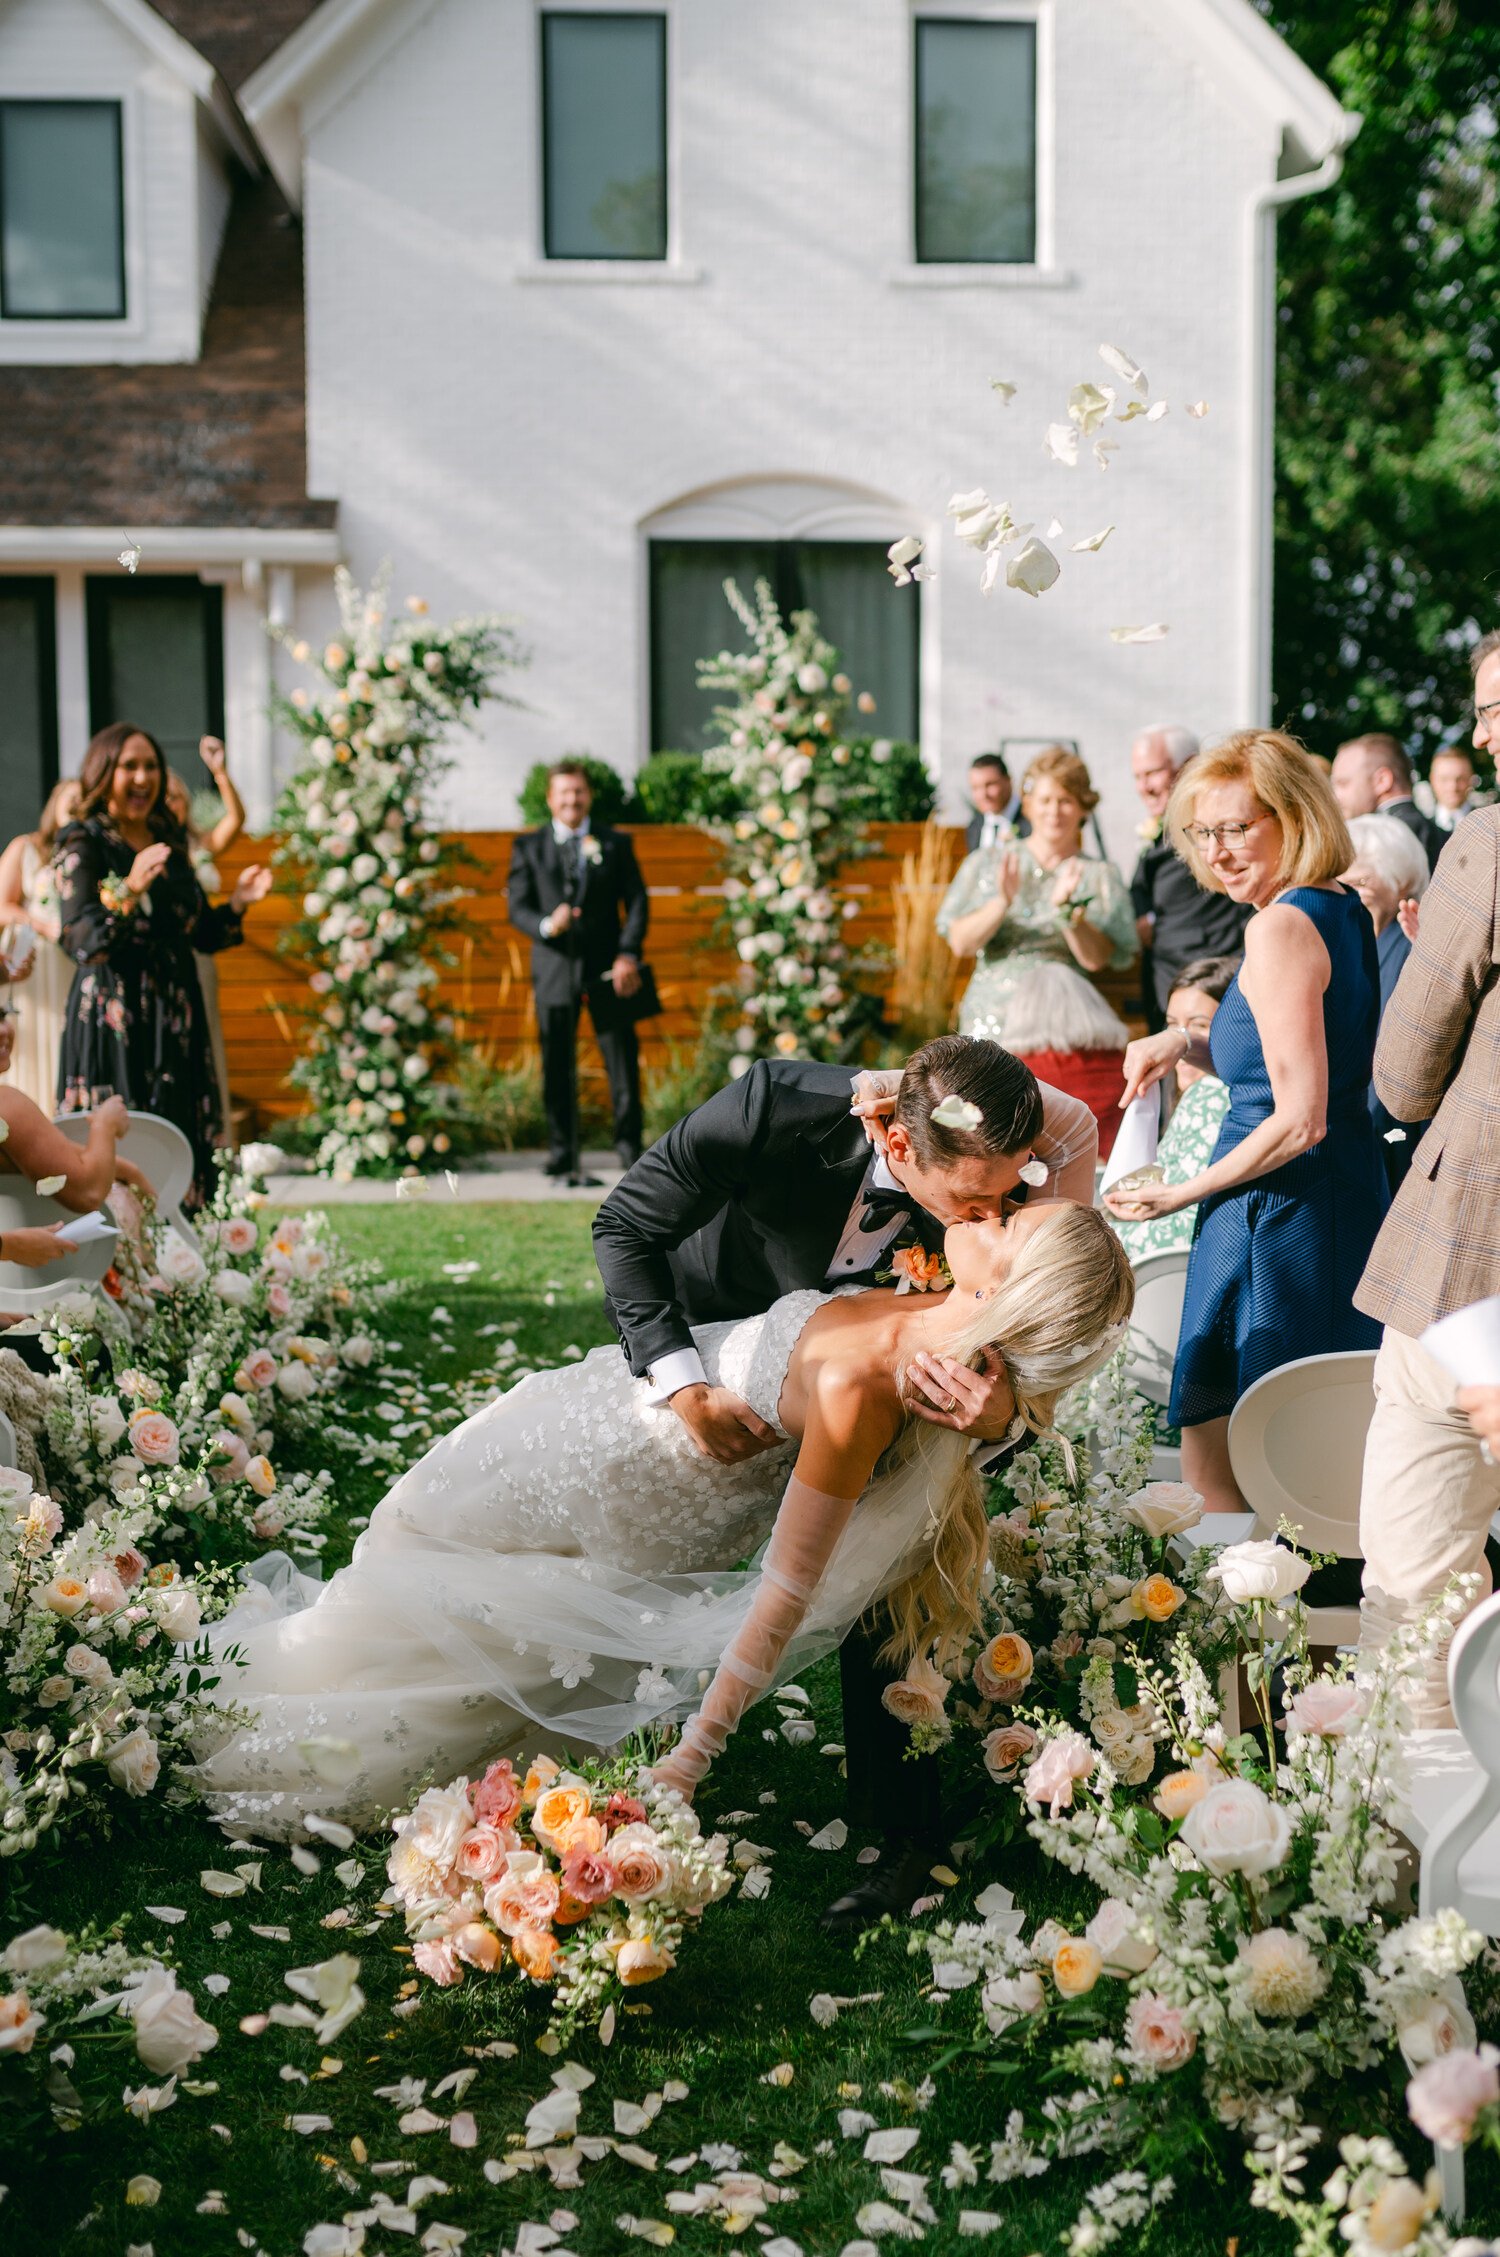 Elm Estate Wedding photo, photo of the bride and groom kissing and dipping with flower petals being thrown at them during their ceremony exit